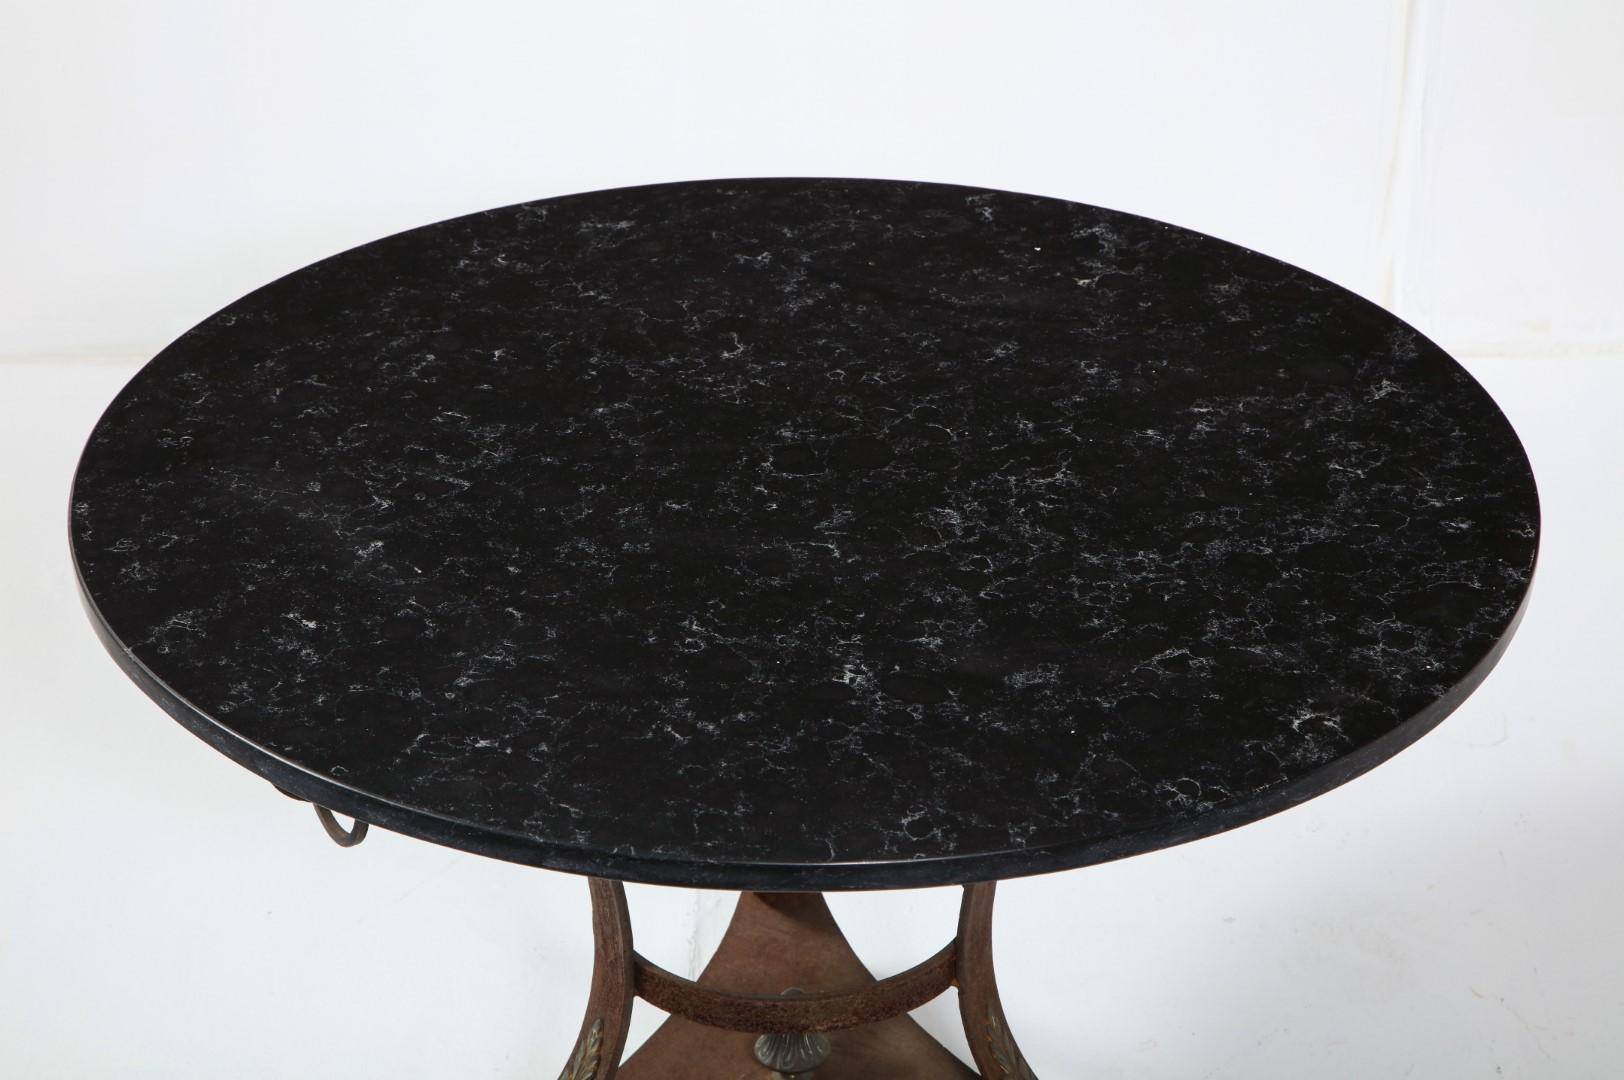 Vintage Italian Empire Style Wrought Iron Coffee Table with Black Marble Top 5